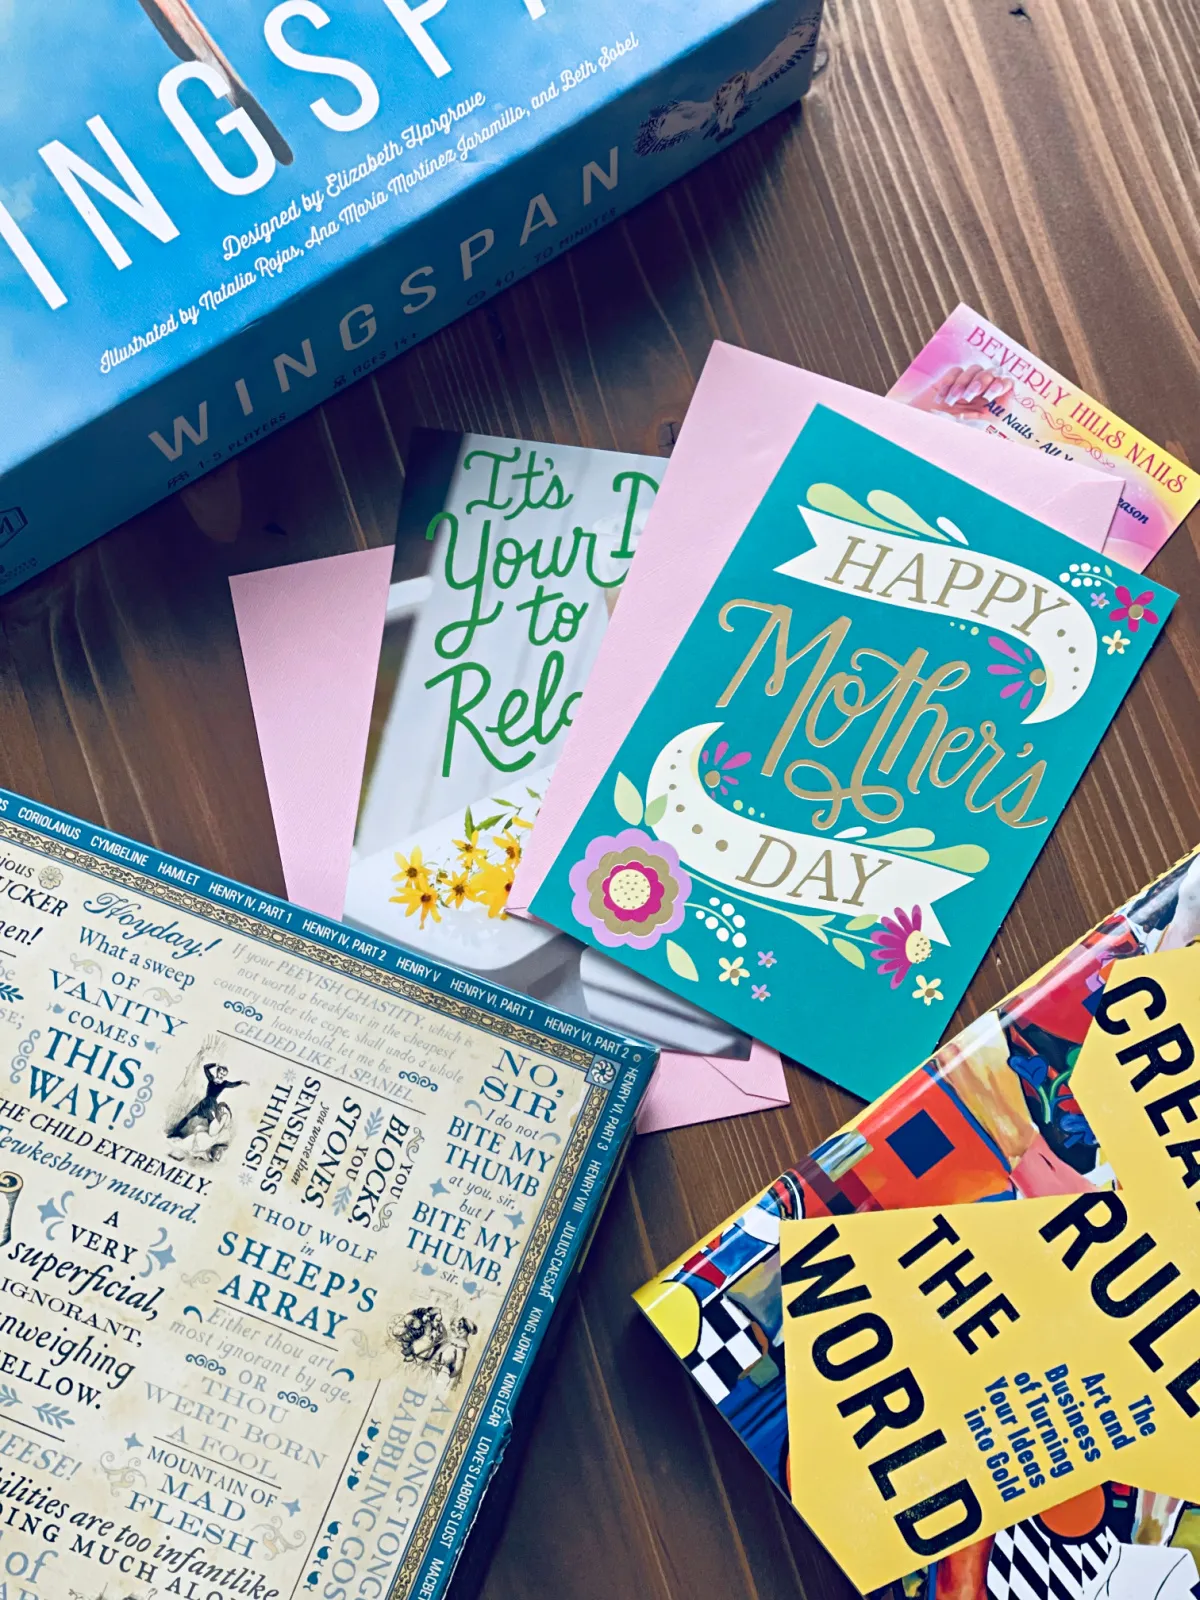 Wingspan board game, jigsaw puzzle, book and "Happy Mother's Day" cards spread out on table